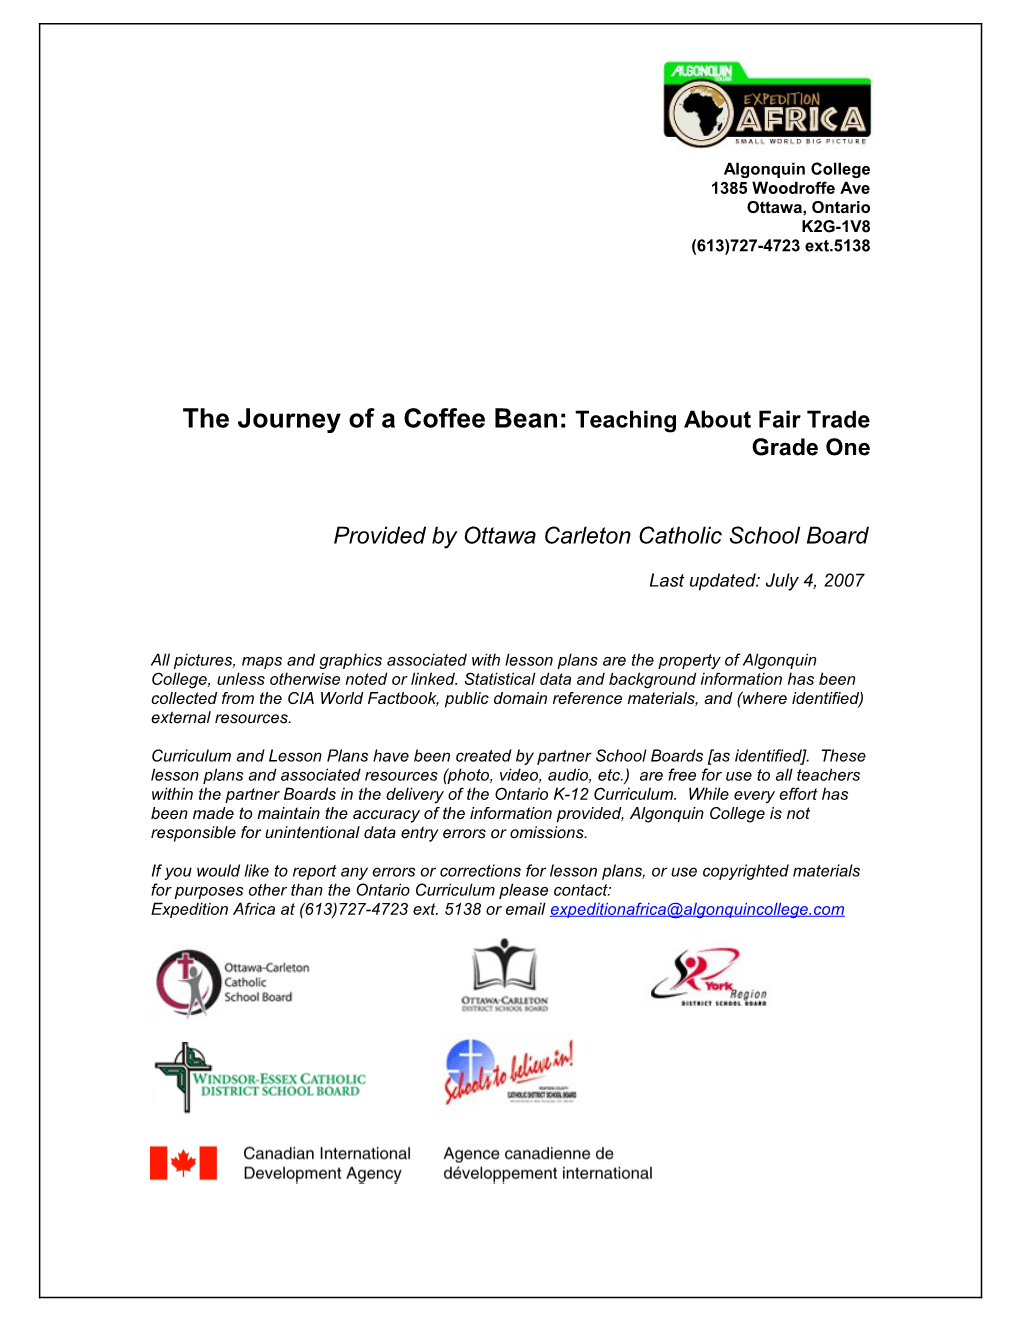 The Journey of a Coffee Bean: Teaching About Fair Trade